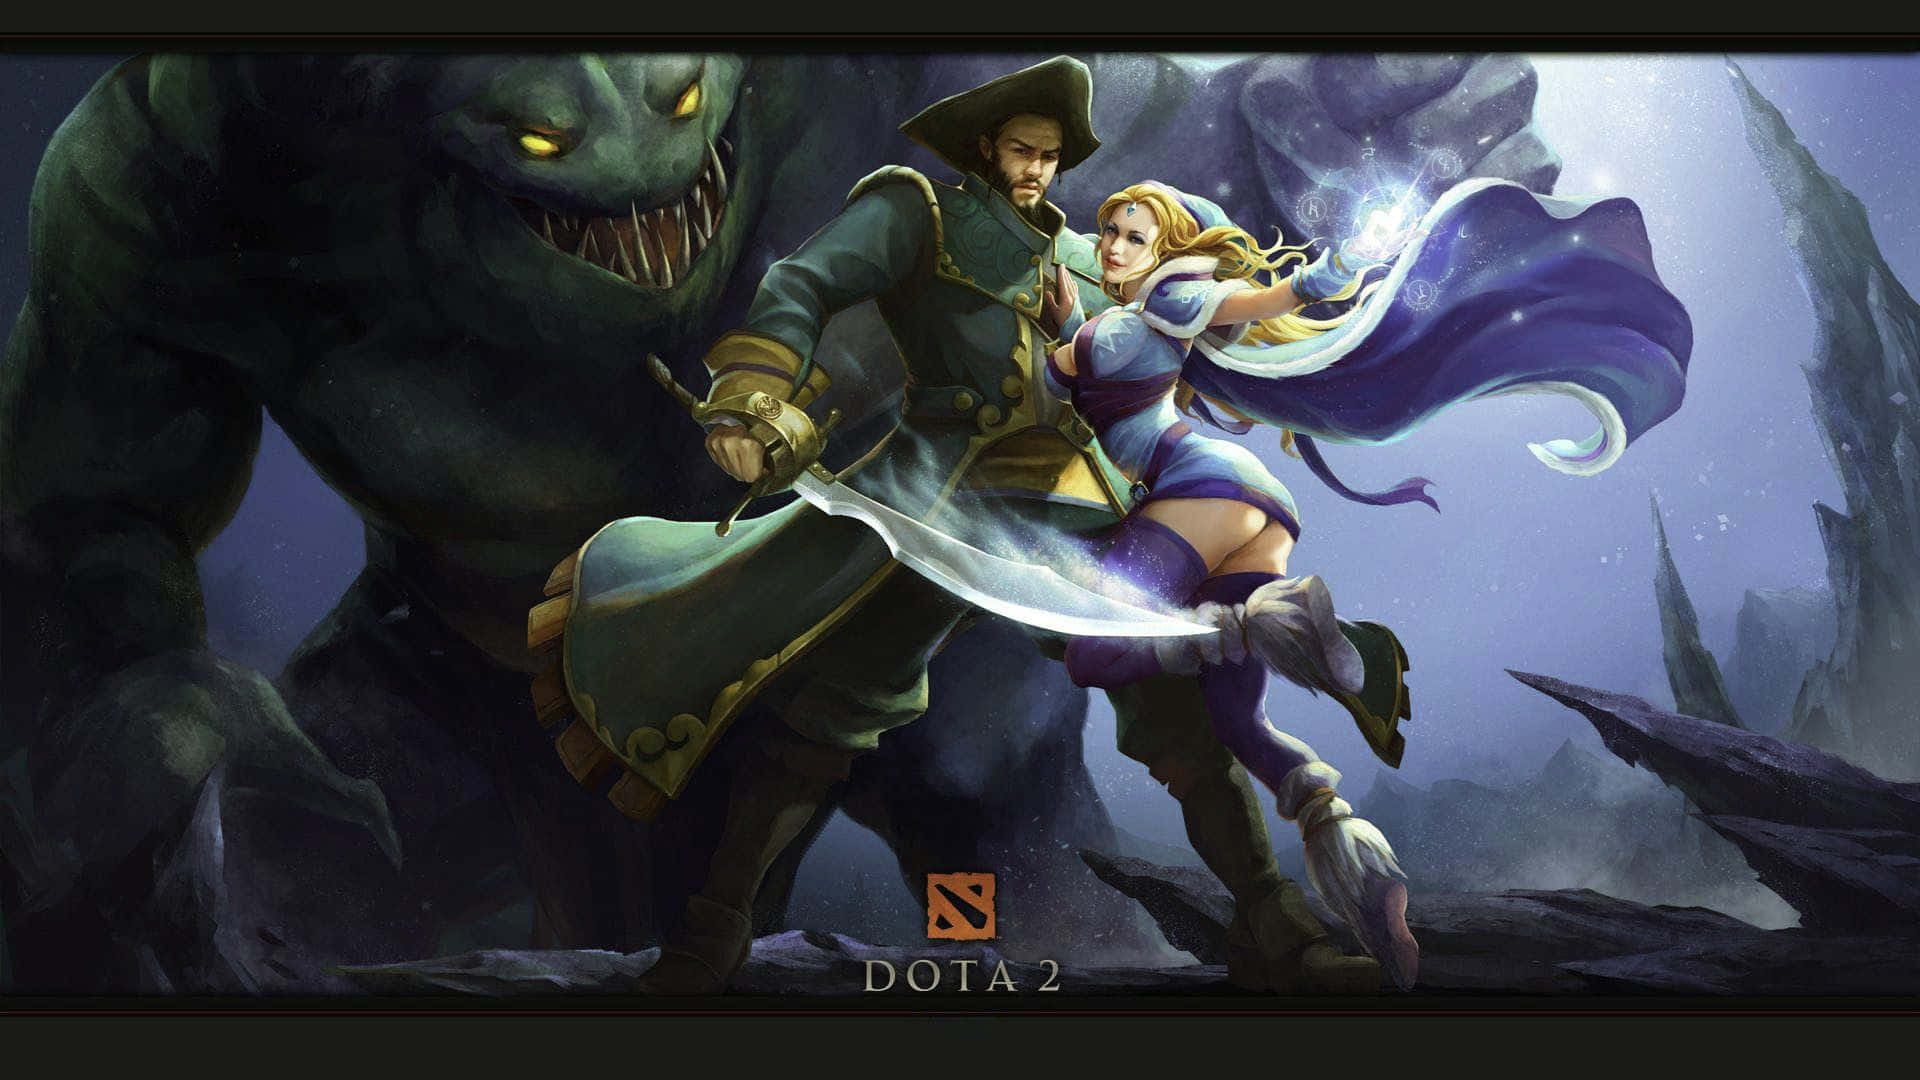 Dota 2 - Leverage Strategy to Outwit Your Opponent.